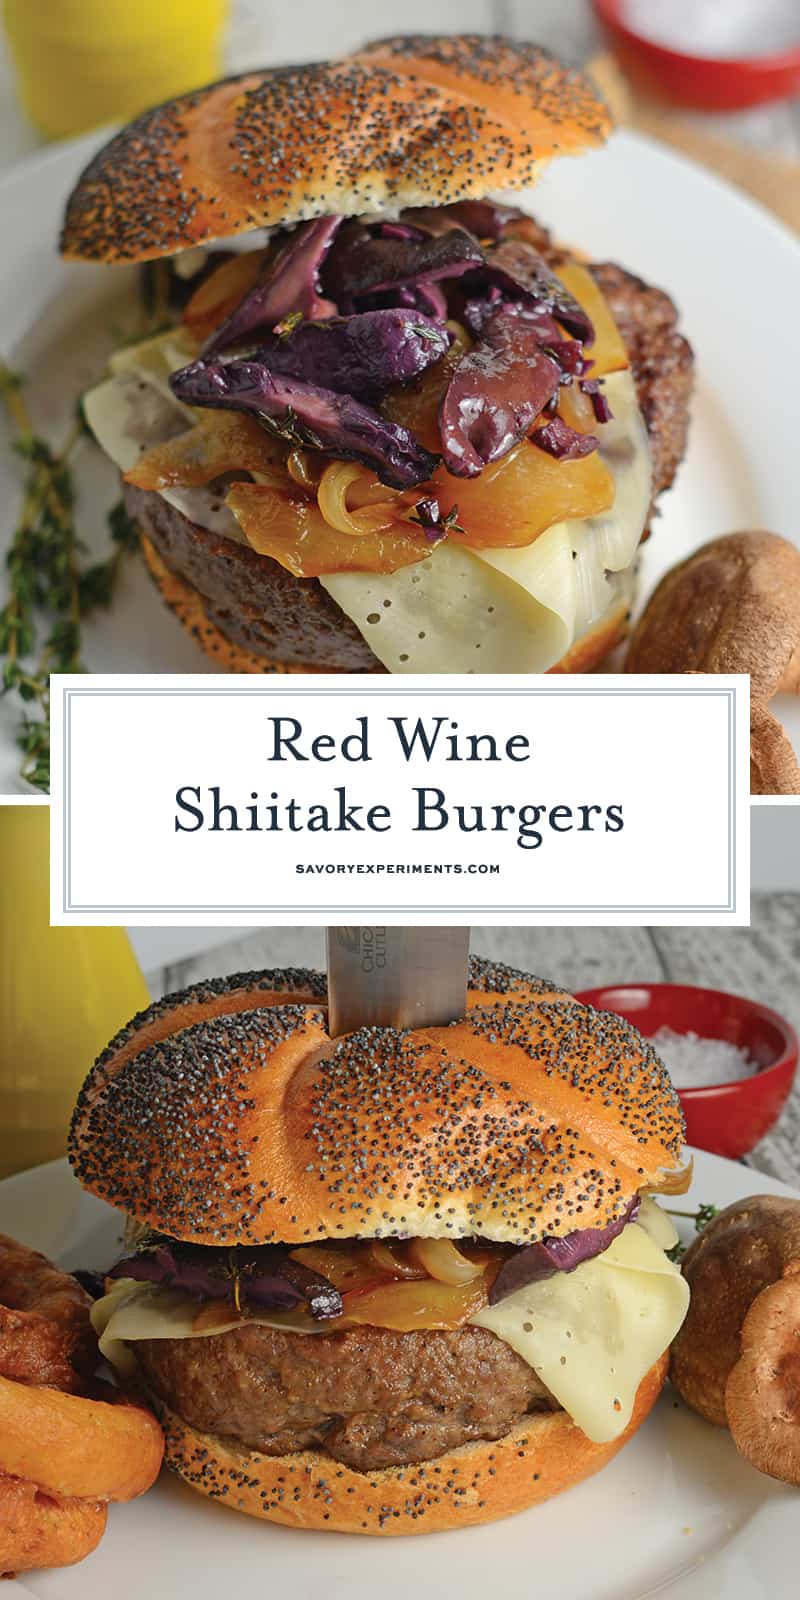 This Red Wine Shiitake Hamburger takes your typical burger recipes and turns it into so much more! The perfect artisan hamburger to enjoy at home! #burgerrecipes #recipeswithhamburgermeat www.savoryexperiments.com